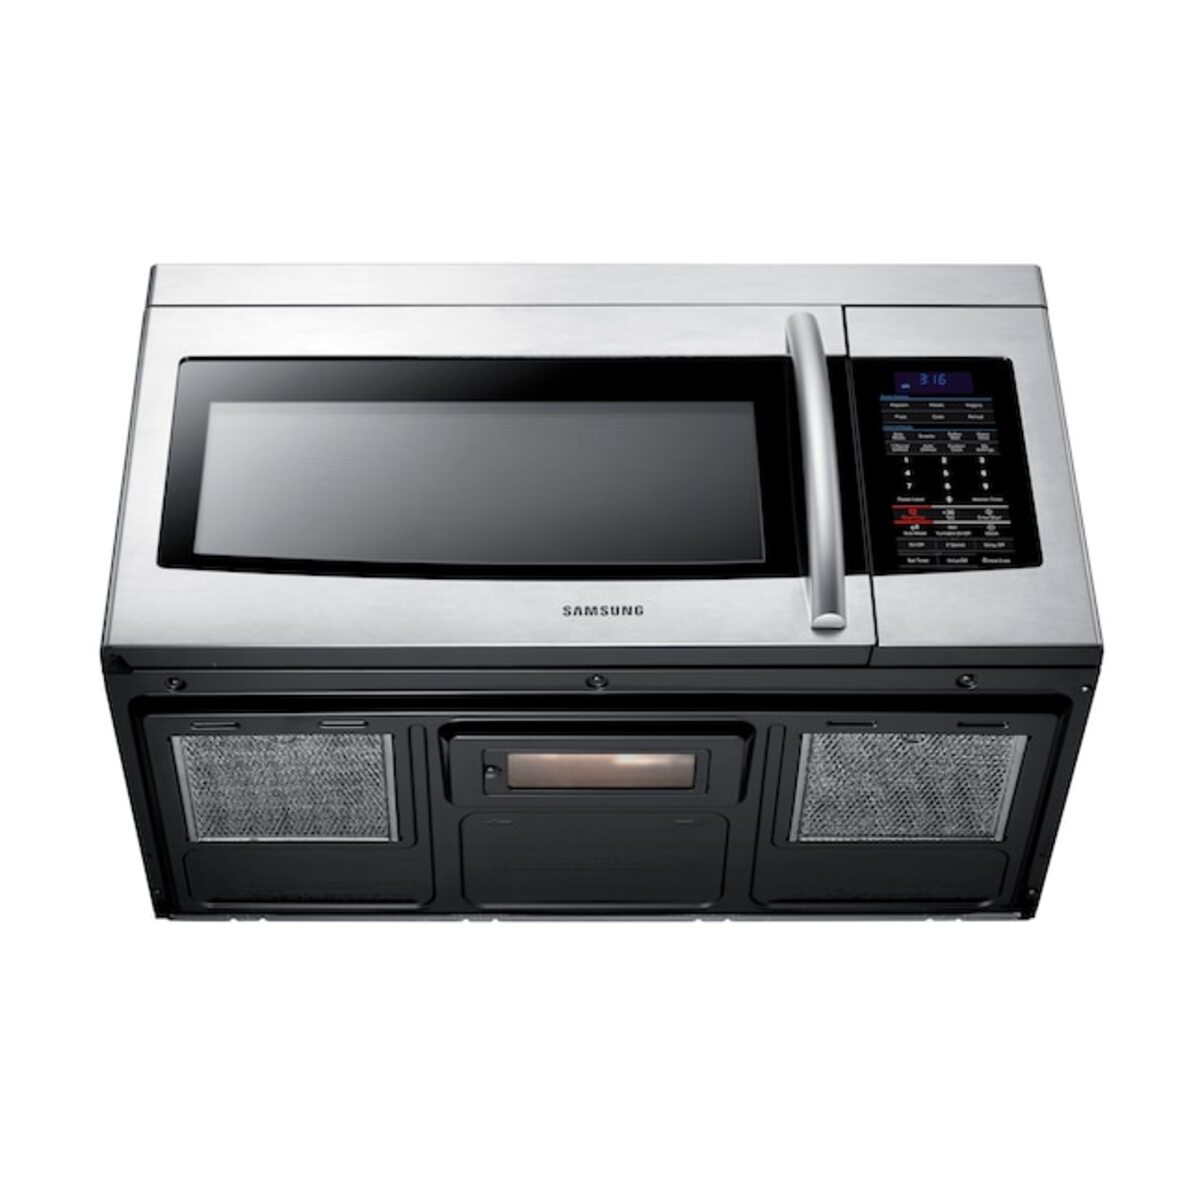 How To Fix The Error Code E-13 For Samsung Microwave